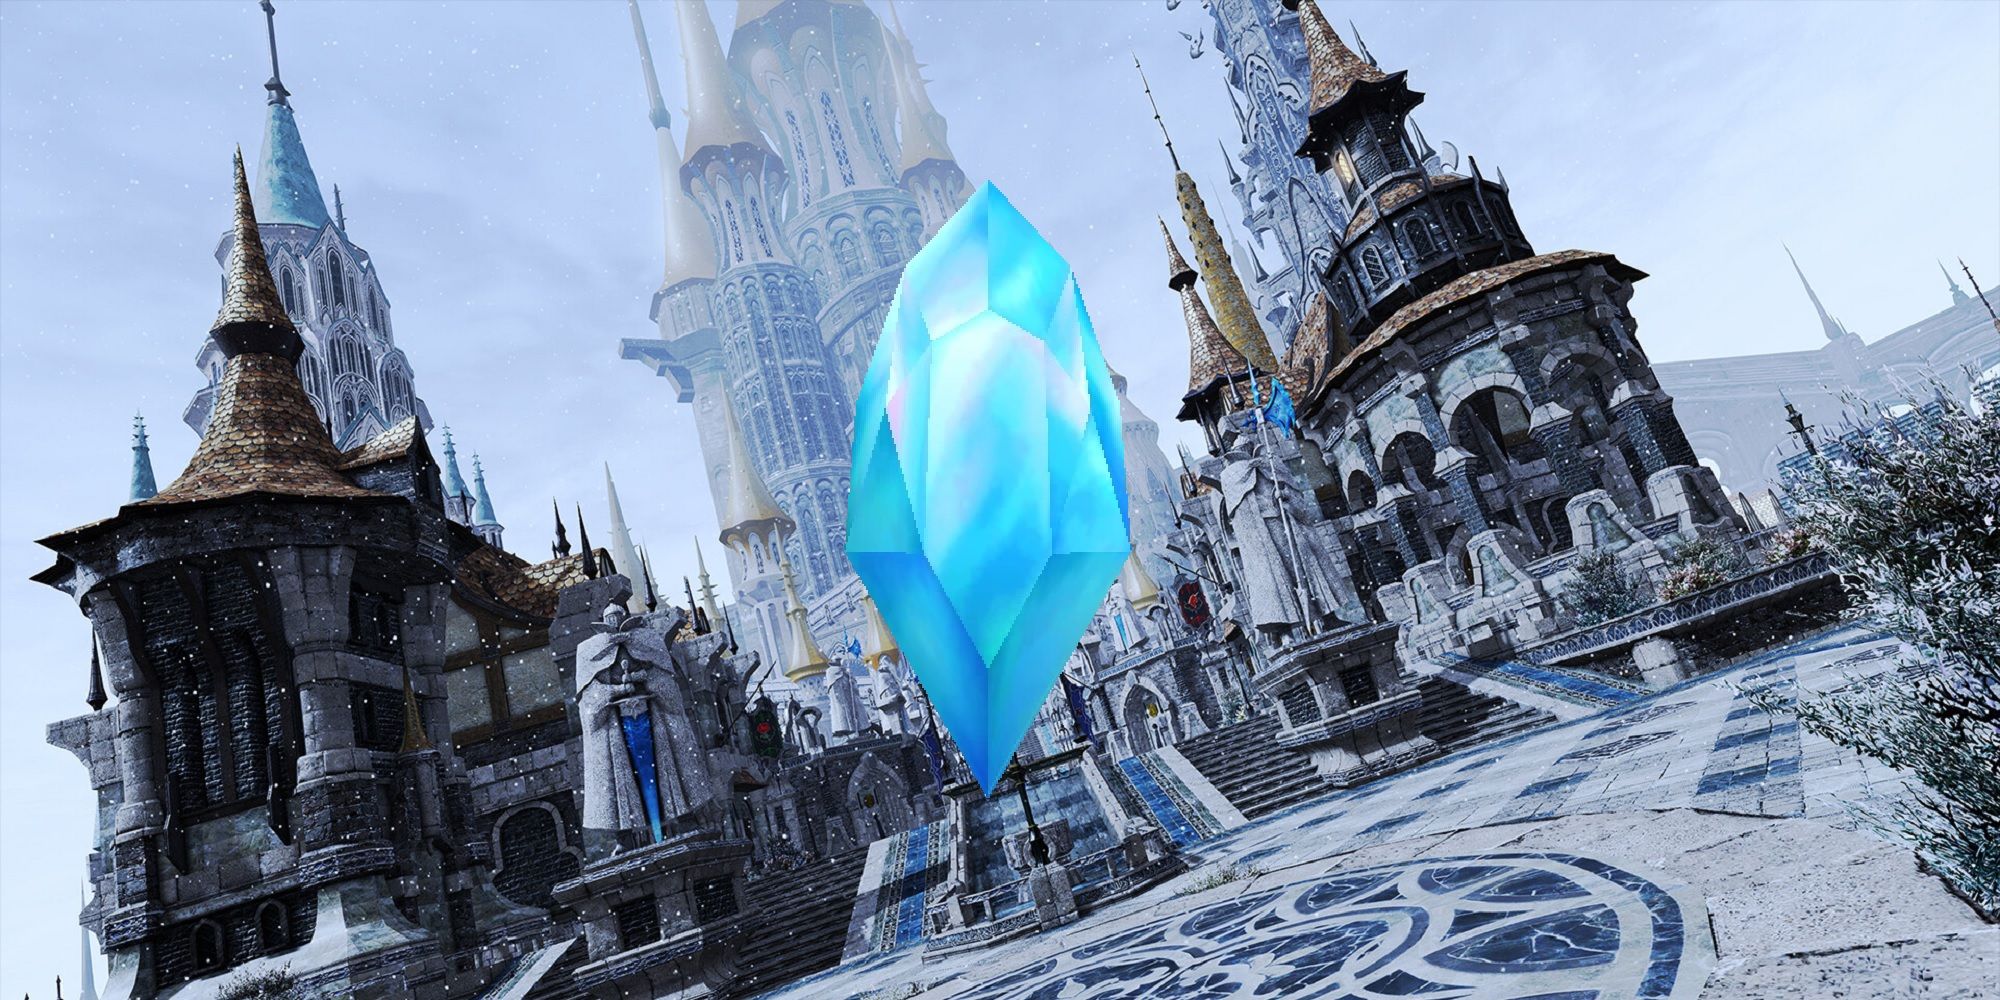 A crystal superimposed over a scene from Final Fantasy